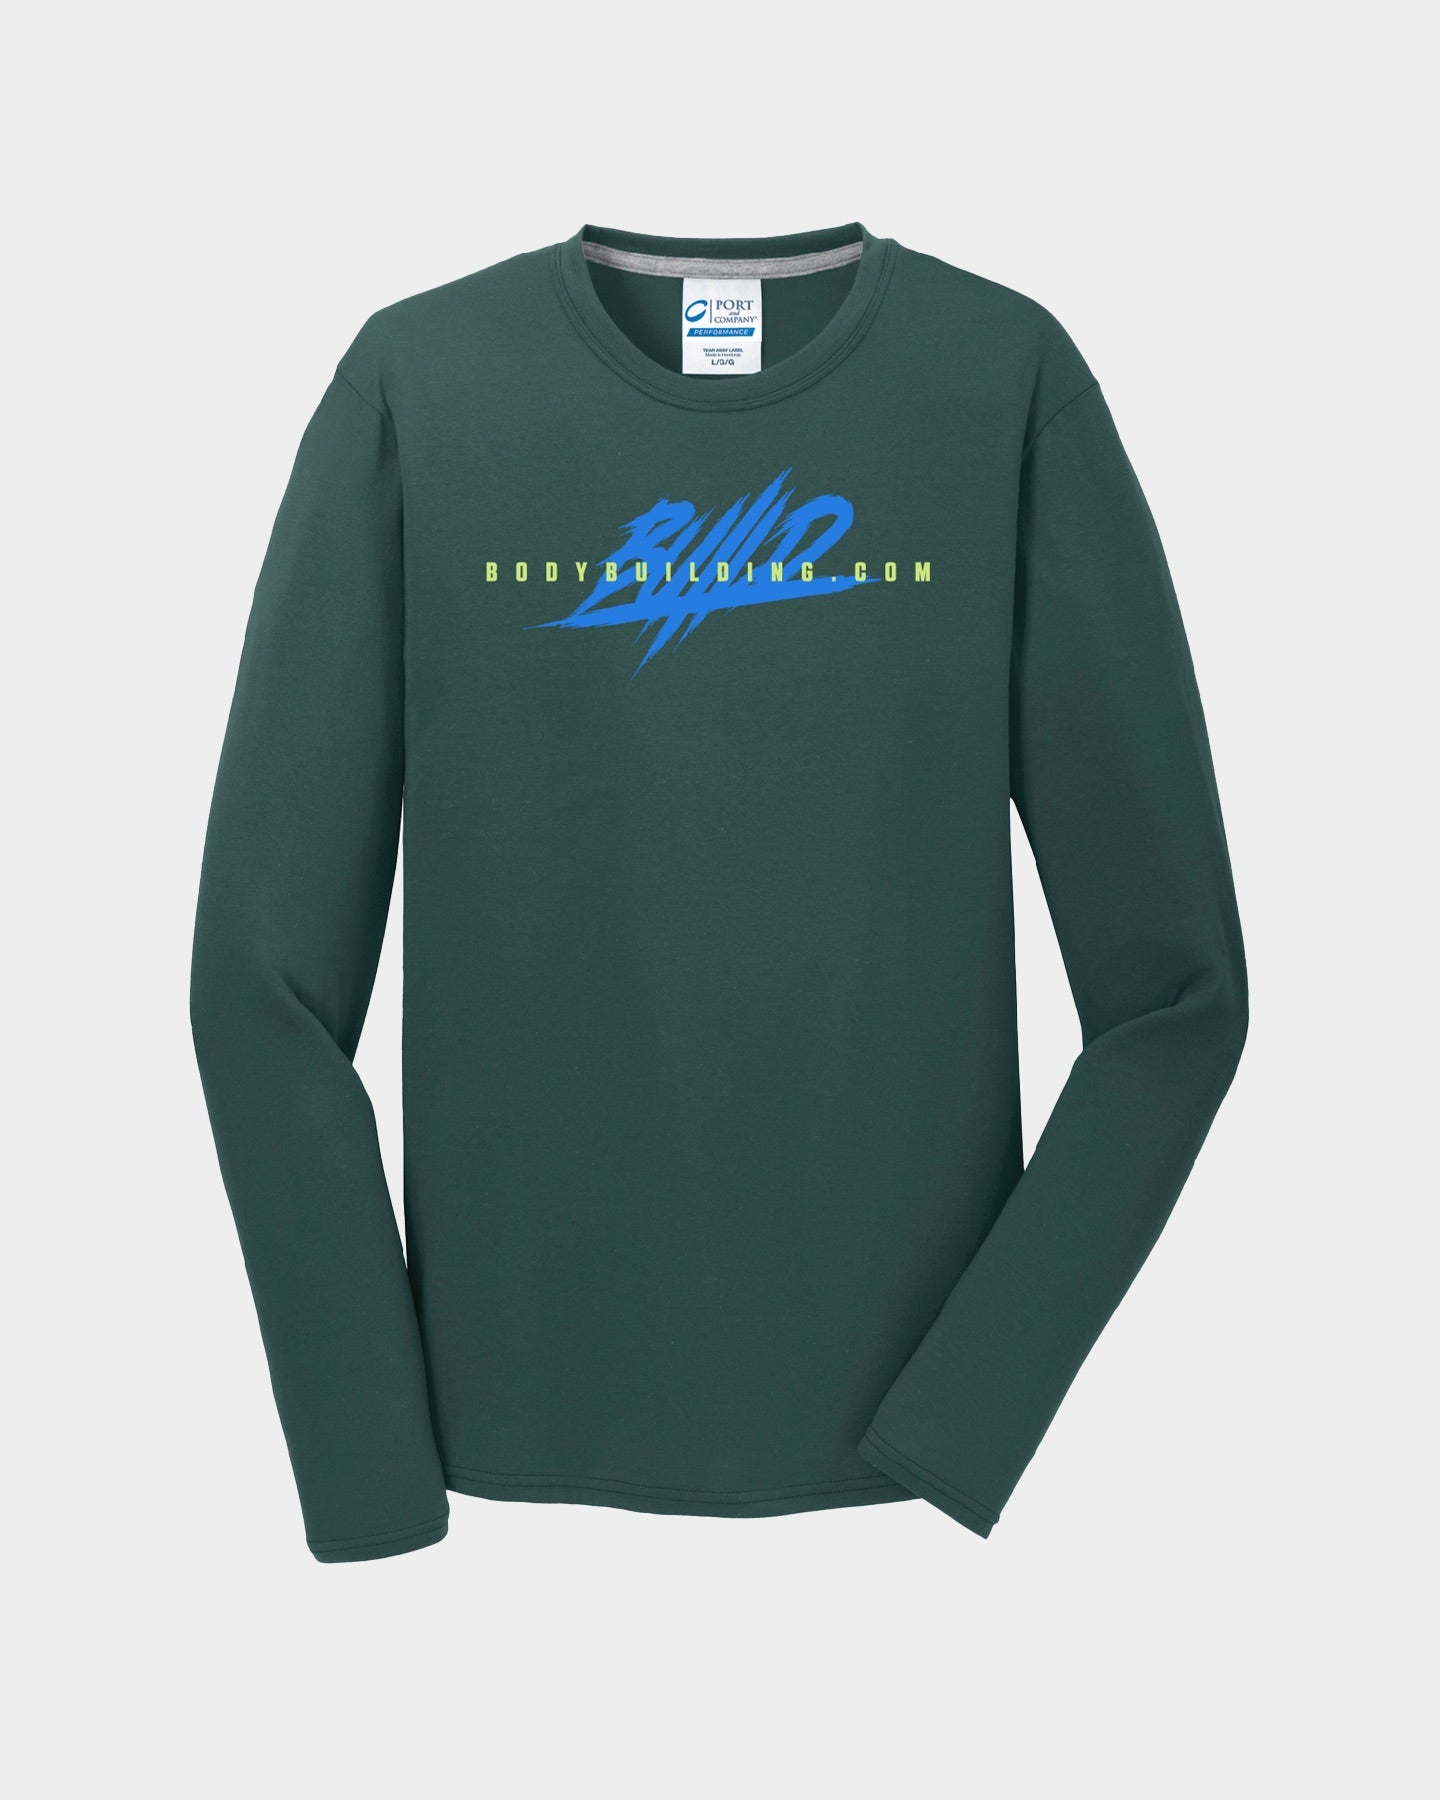 Image of Bodybuilding.com Clothing Above the Rest Long Sleeve